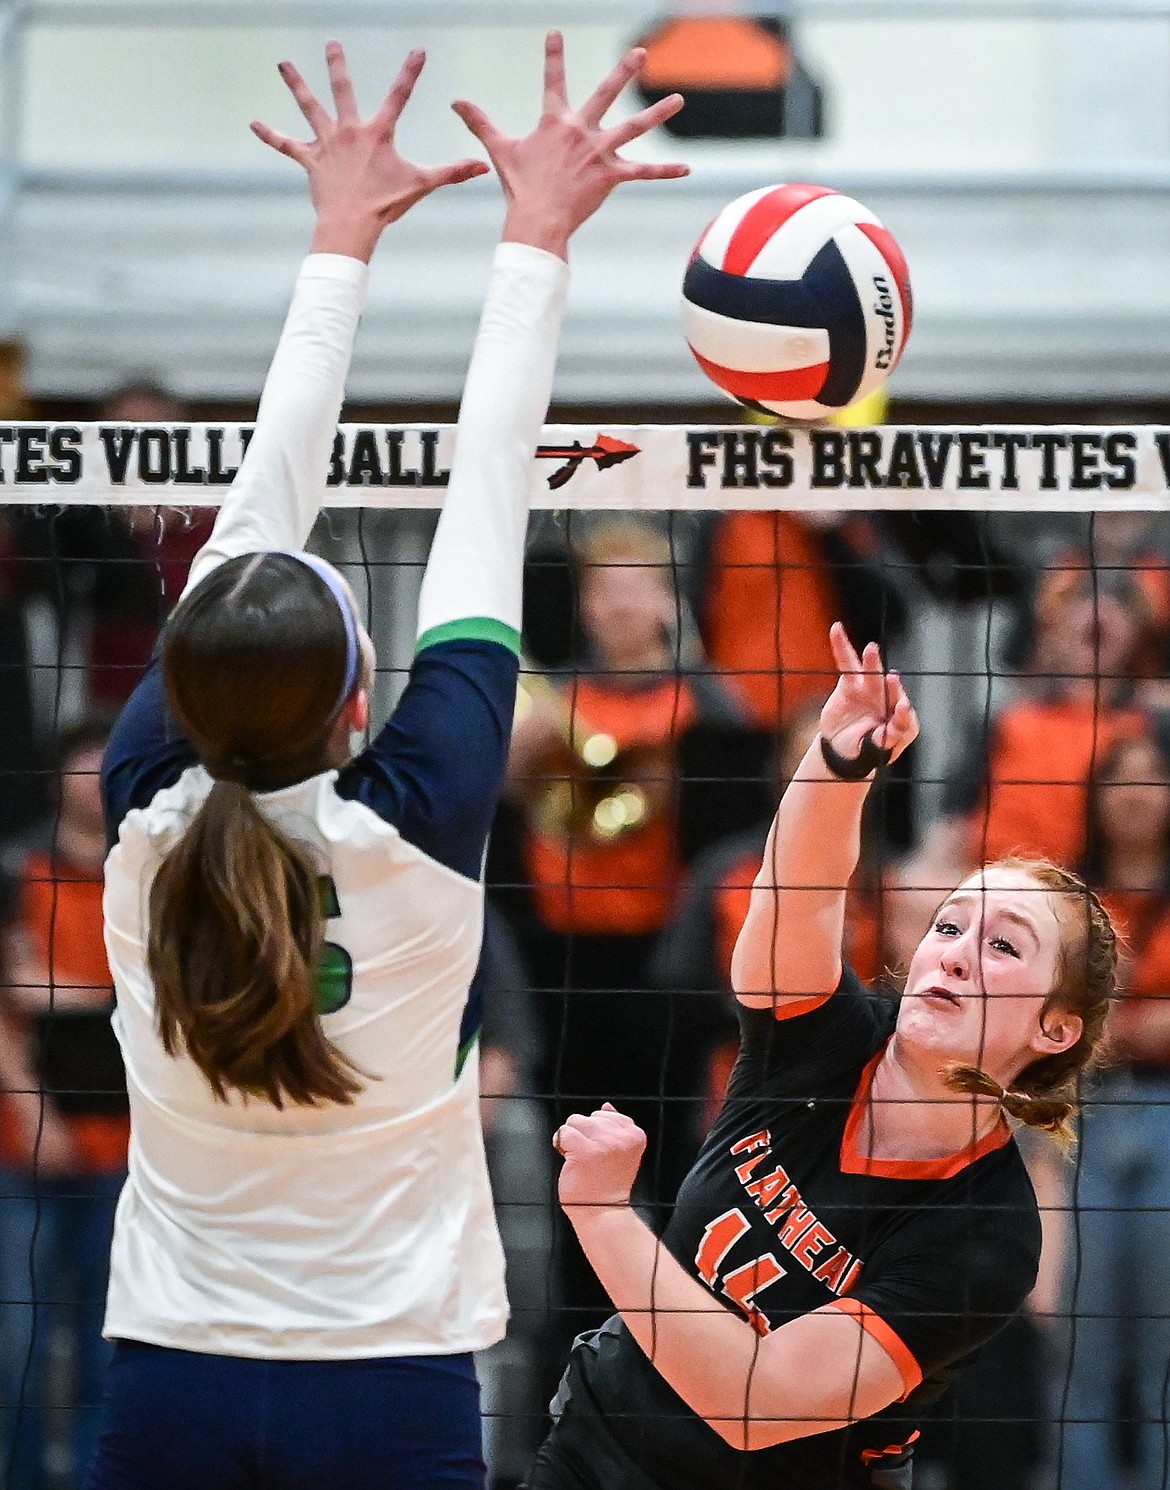 Flathead's Libby Peltz (14) goes up for a kill against Glacier during crosstown volleyball at Flathead High School on Thursday, Sept. 29. (Casey Kreider/Daily Inter Lake)